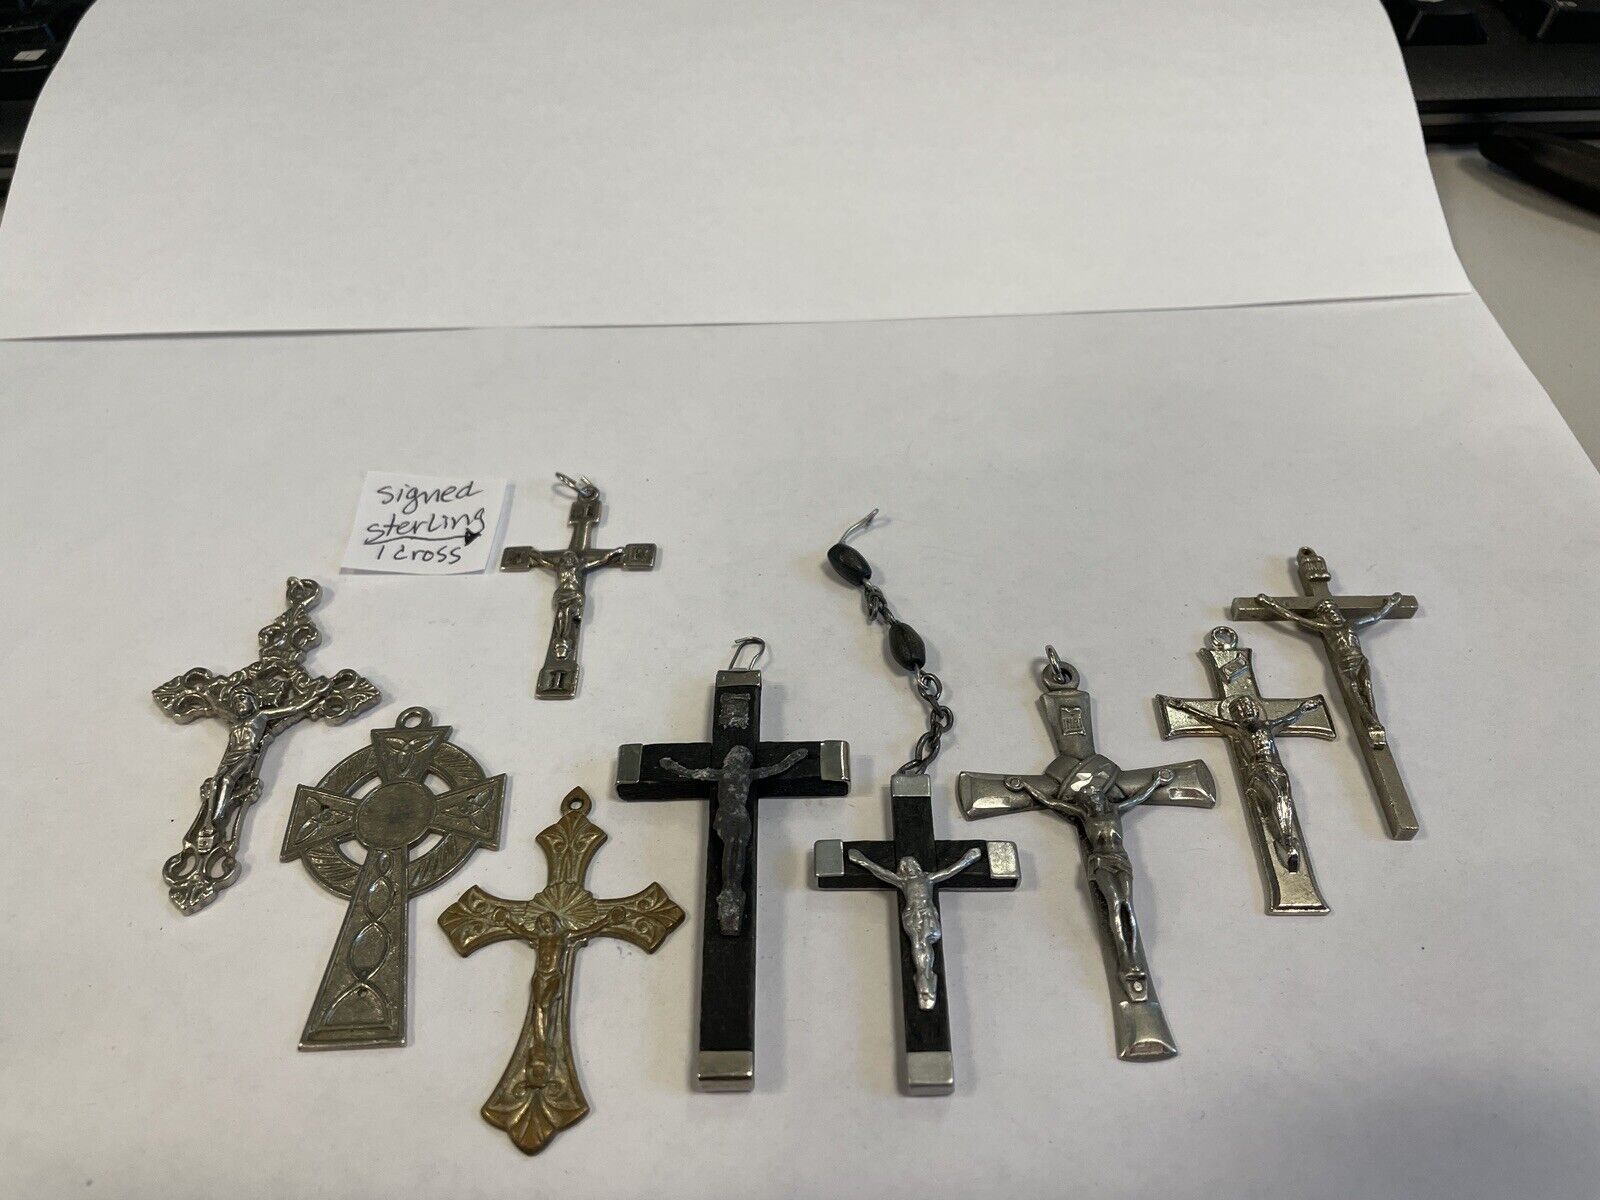 9 (Nine) VERY VINTAGE/ANTIQUE RELIGIOUS CROSSES (1 is sterling) CHECK THEM OUT